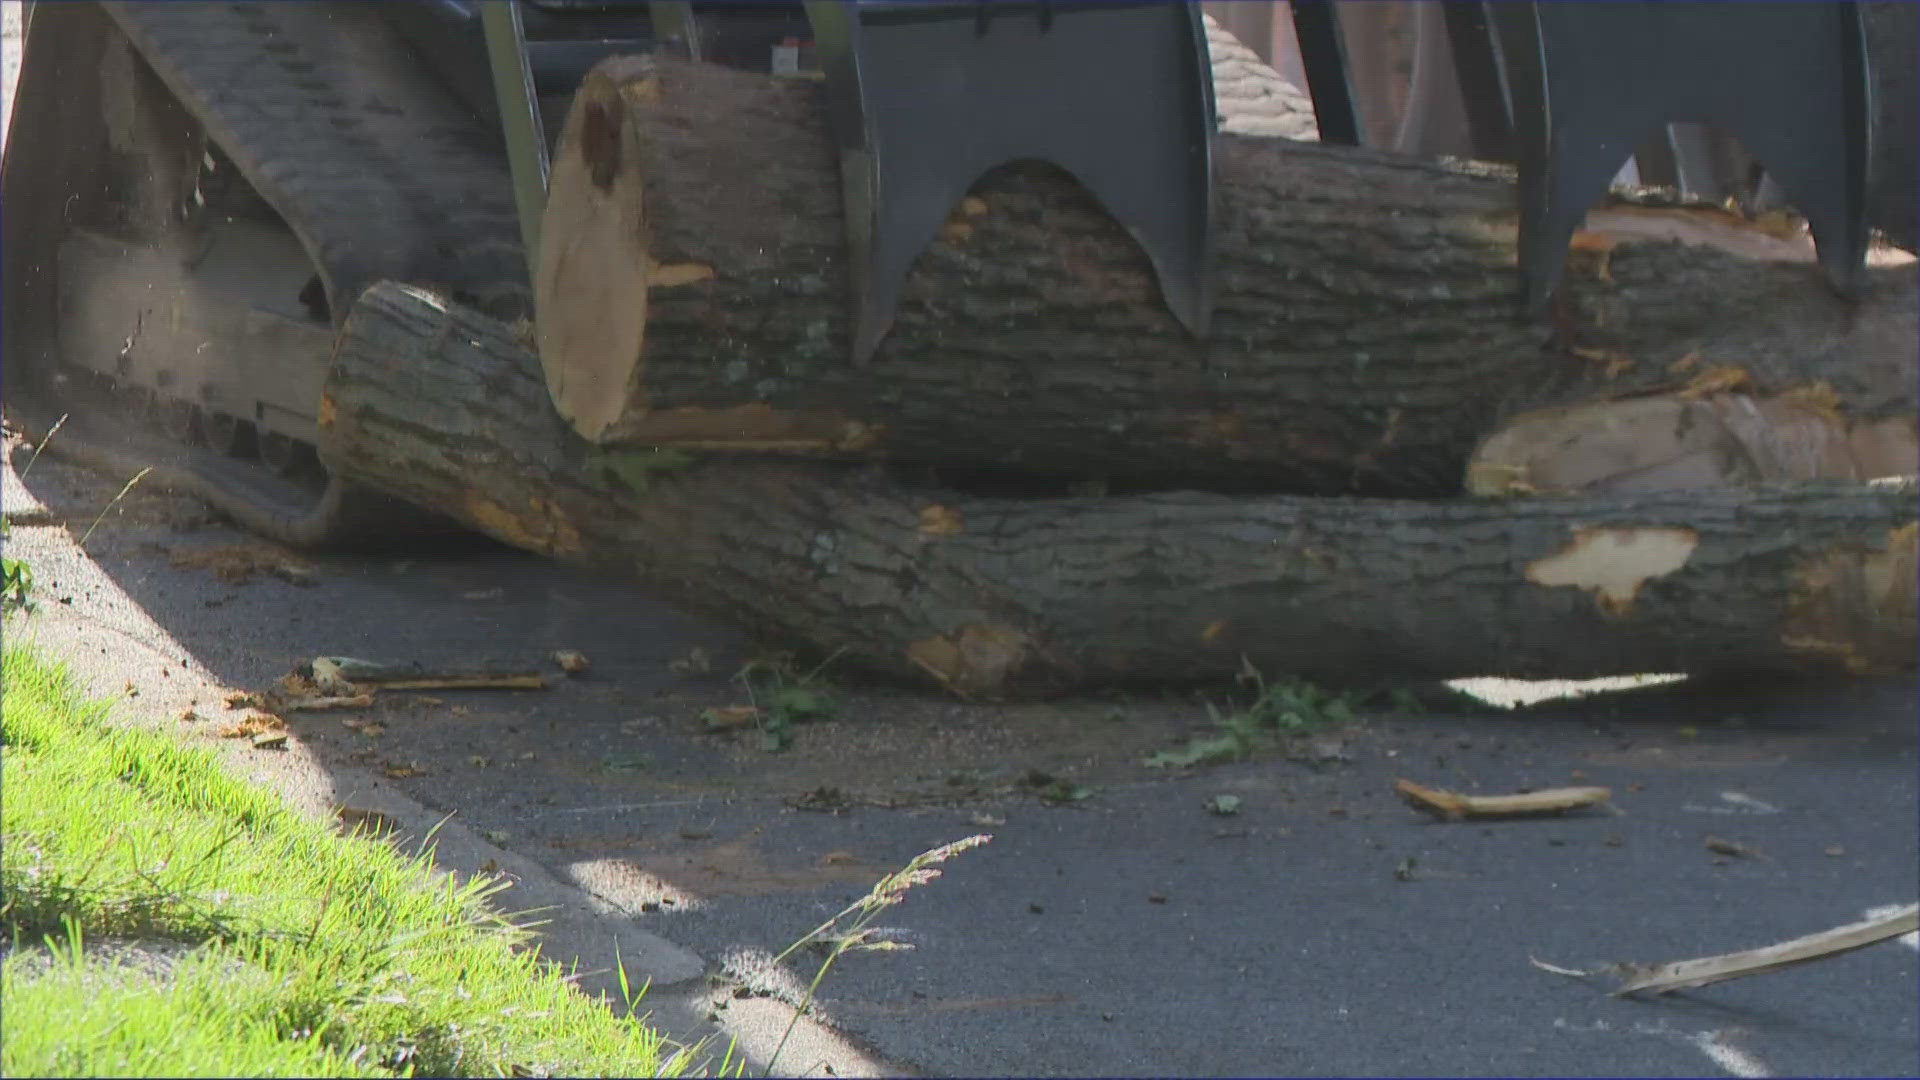 A viewer reached out to WUSA 9 about the possibility of scams as the recovery process starts following a tornado touching down.